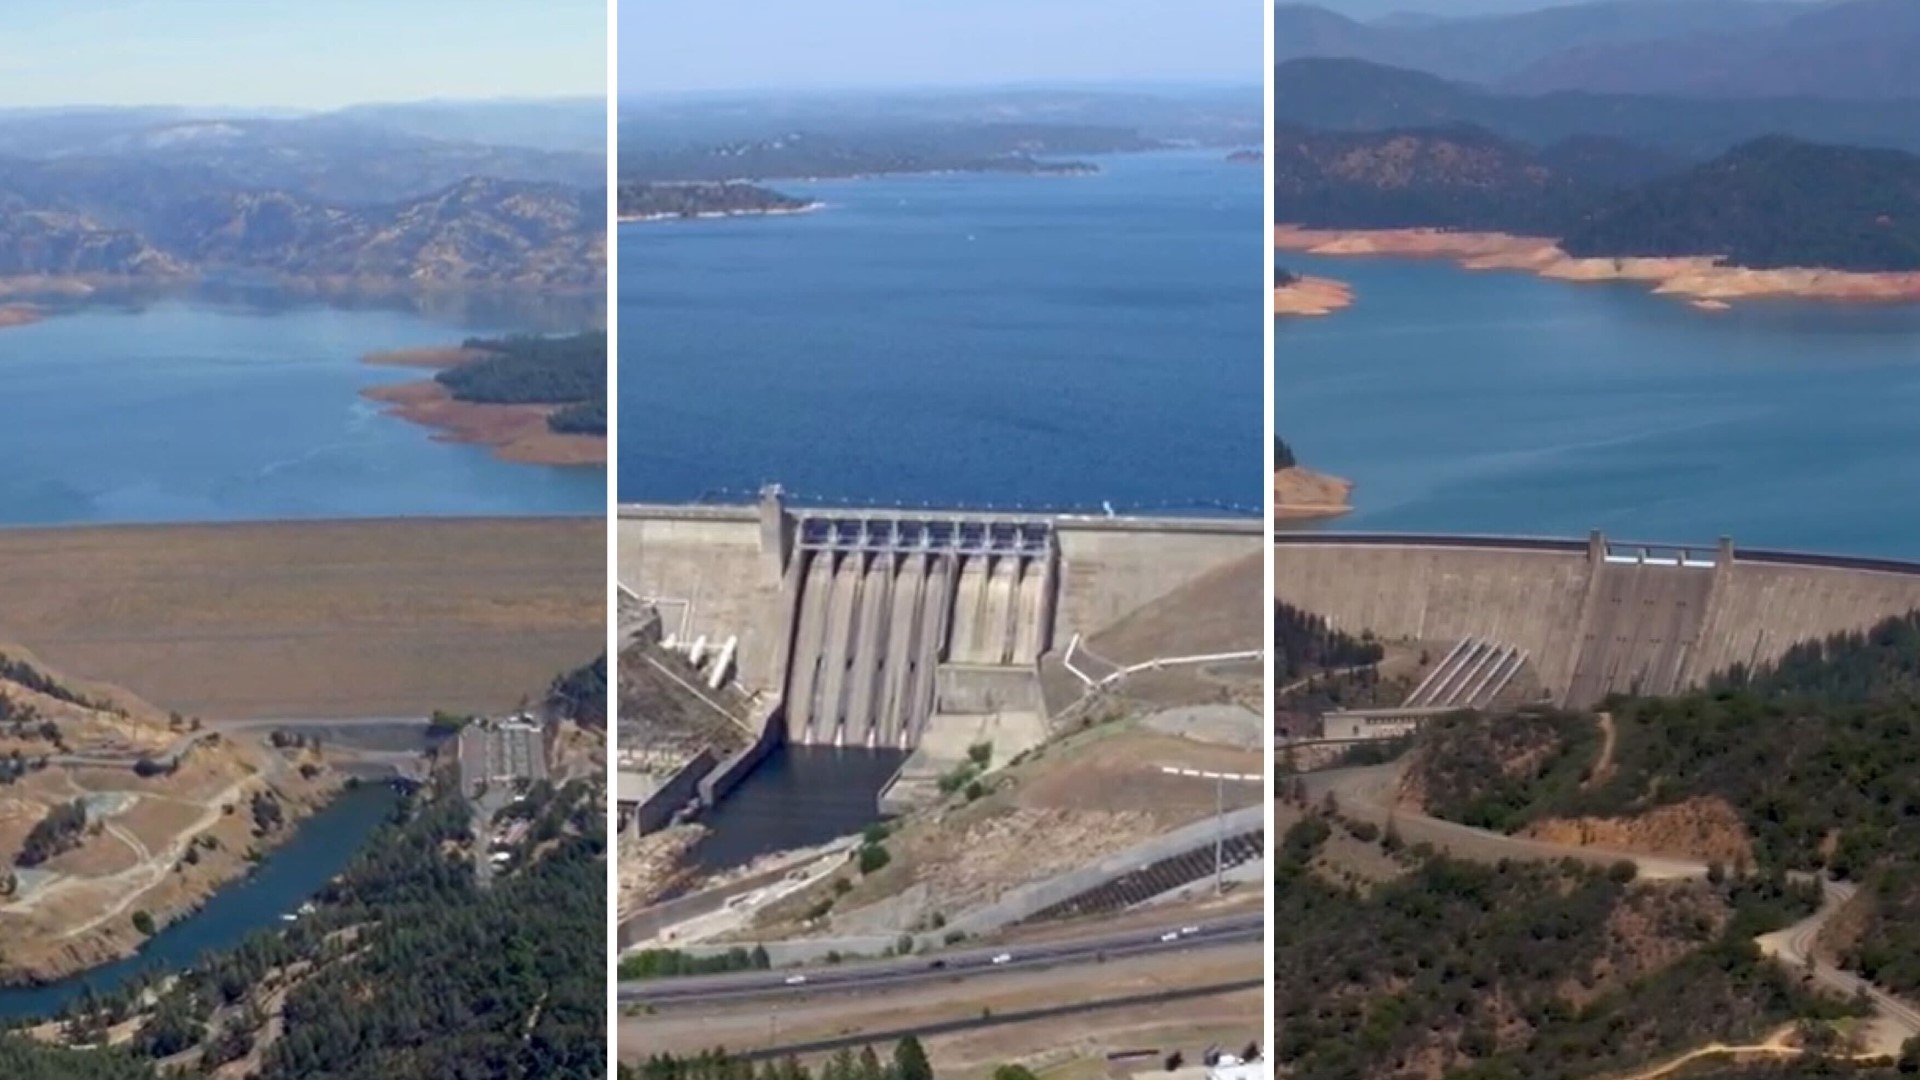 Folsom Lake stands in stark contrast to Lake Oroville and Lake Shasta, in terms of water levels. Monica Woods explains why.